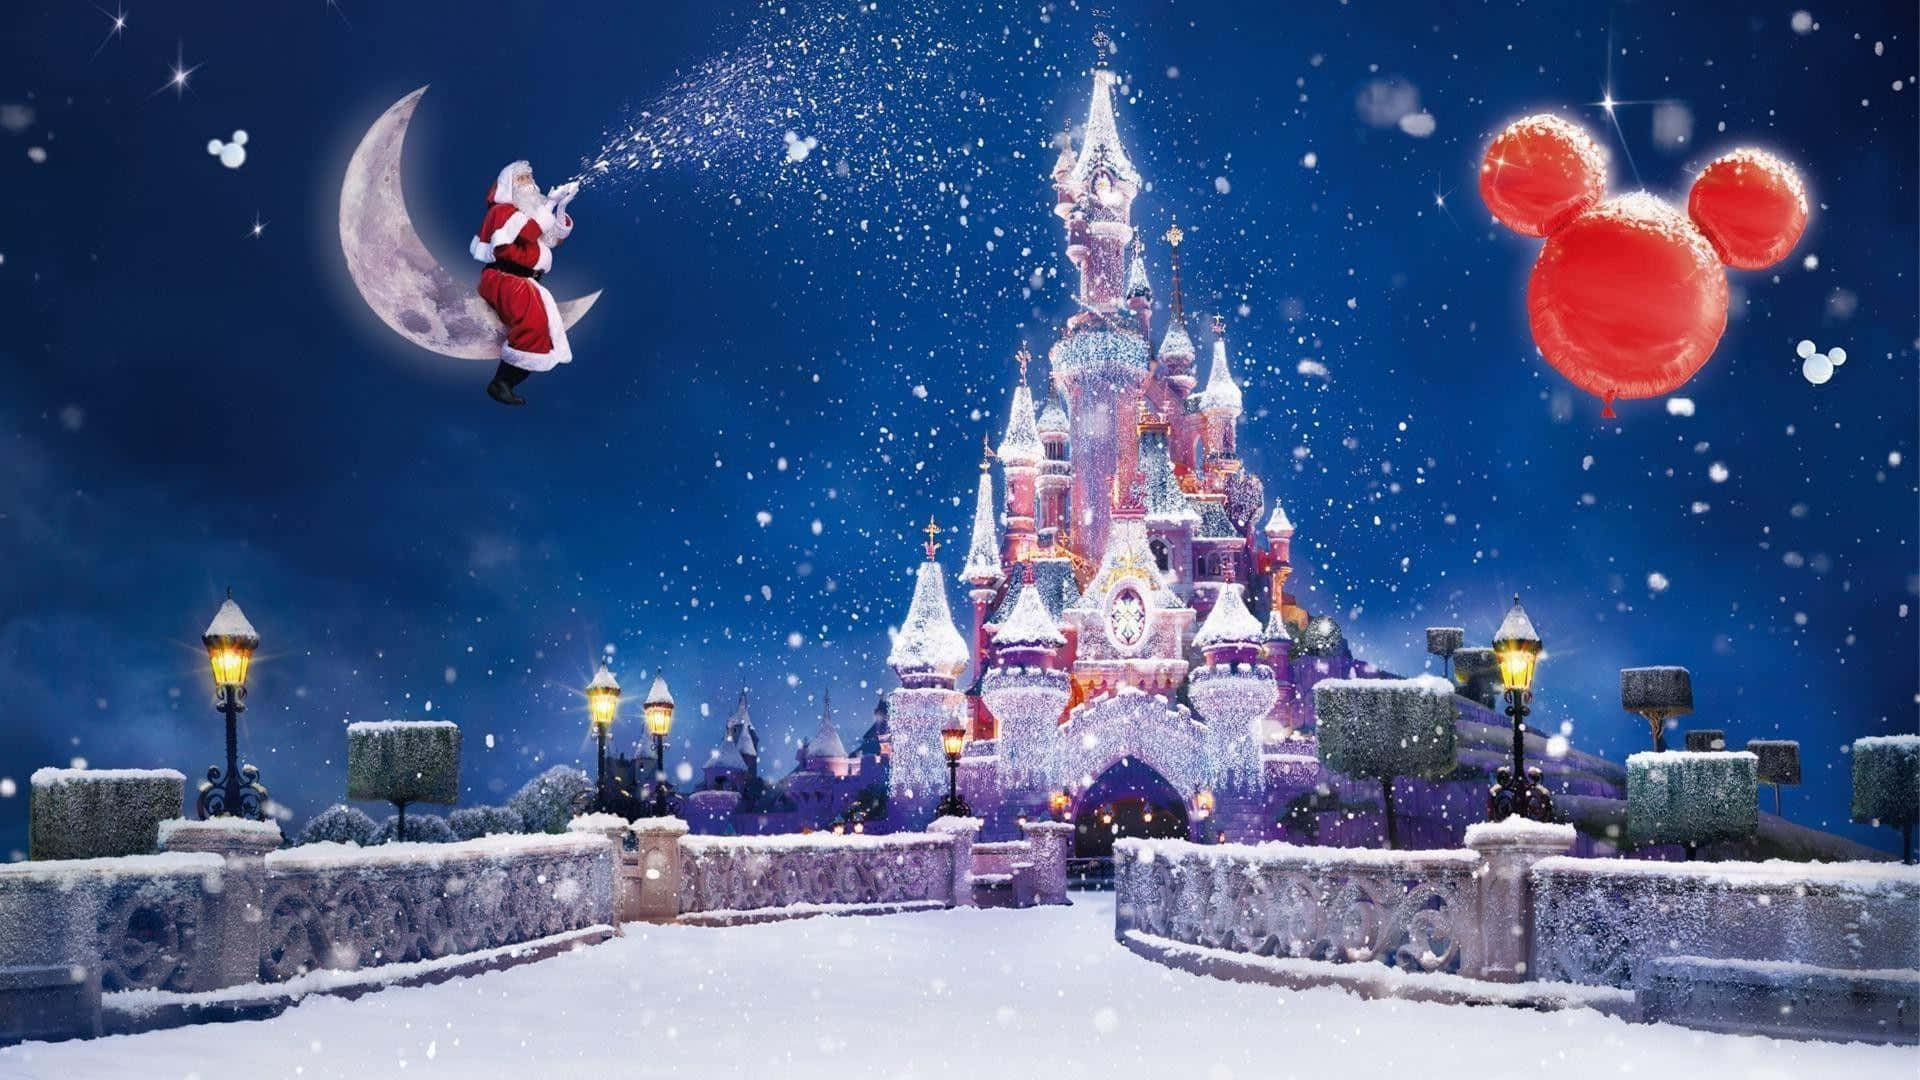 "Experience the Magic of a Winter Wonderland this Christmas!" Wallpaper